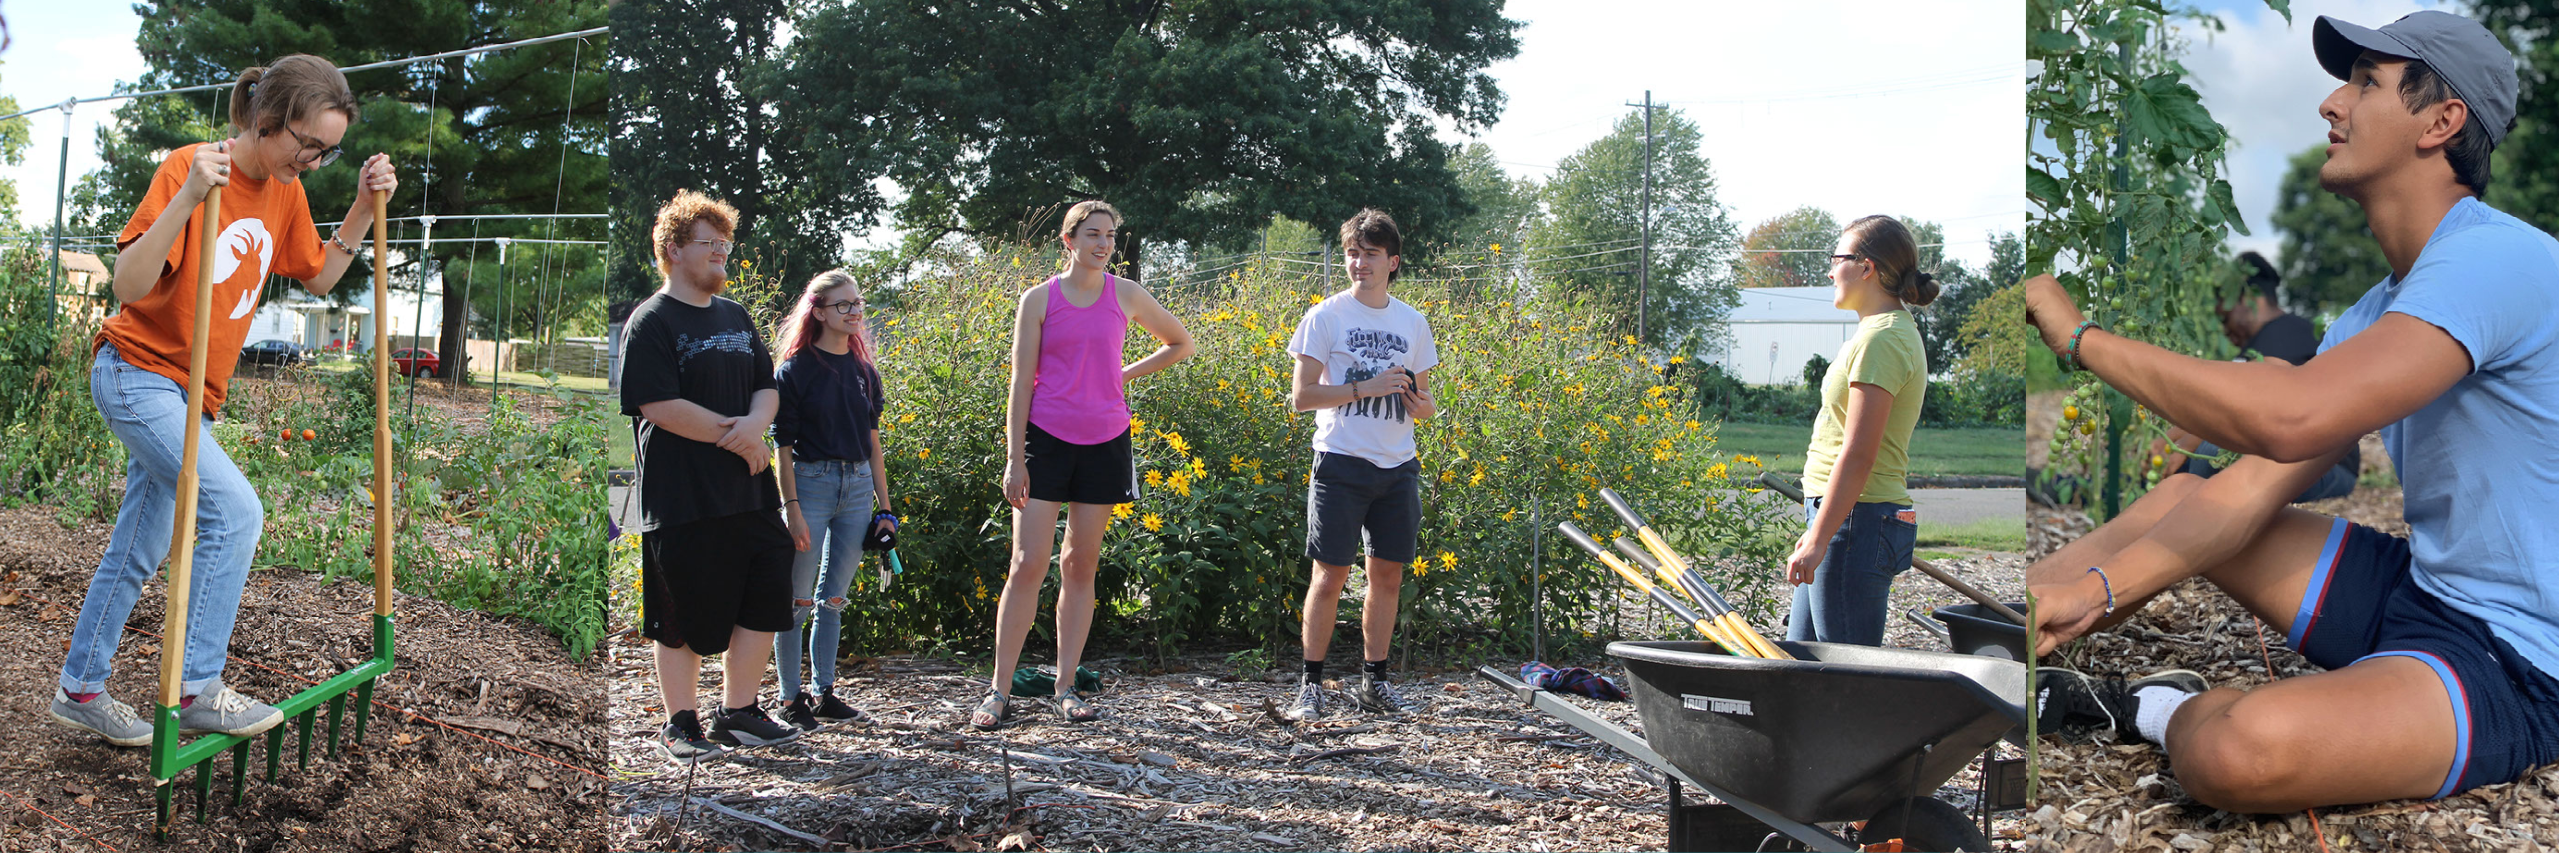 Image on the left is a student in an orange shirt using a tool into the ground. The middle image is a group of students standing in front of yellow native flowers. The image on the right is a student in a blue shirt stringing tomato plants along a string.